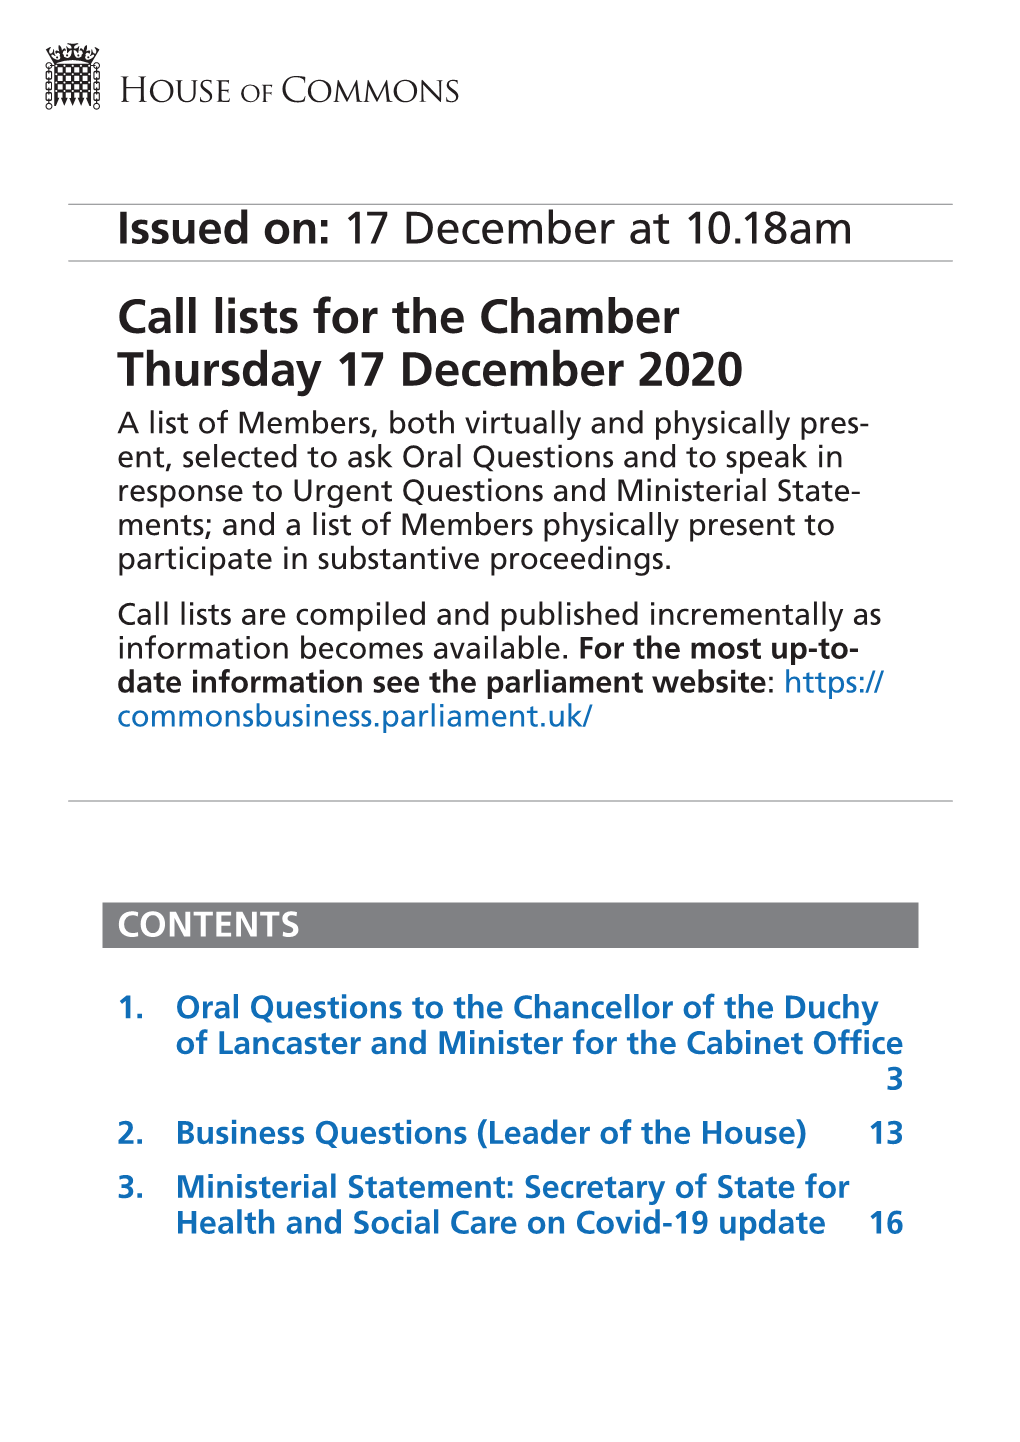 Ministerial Statement: Secretary of State for Health and Social Care on Covid-19 Update 16 2 Thursday 17 December 2020